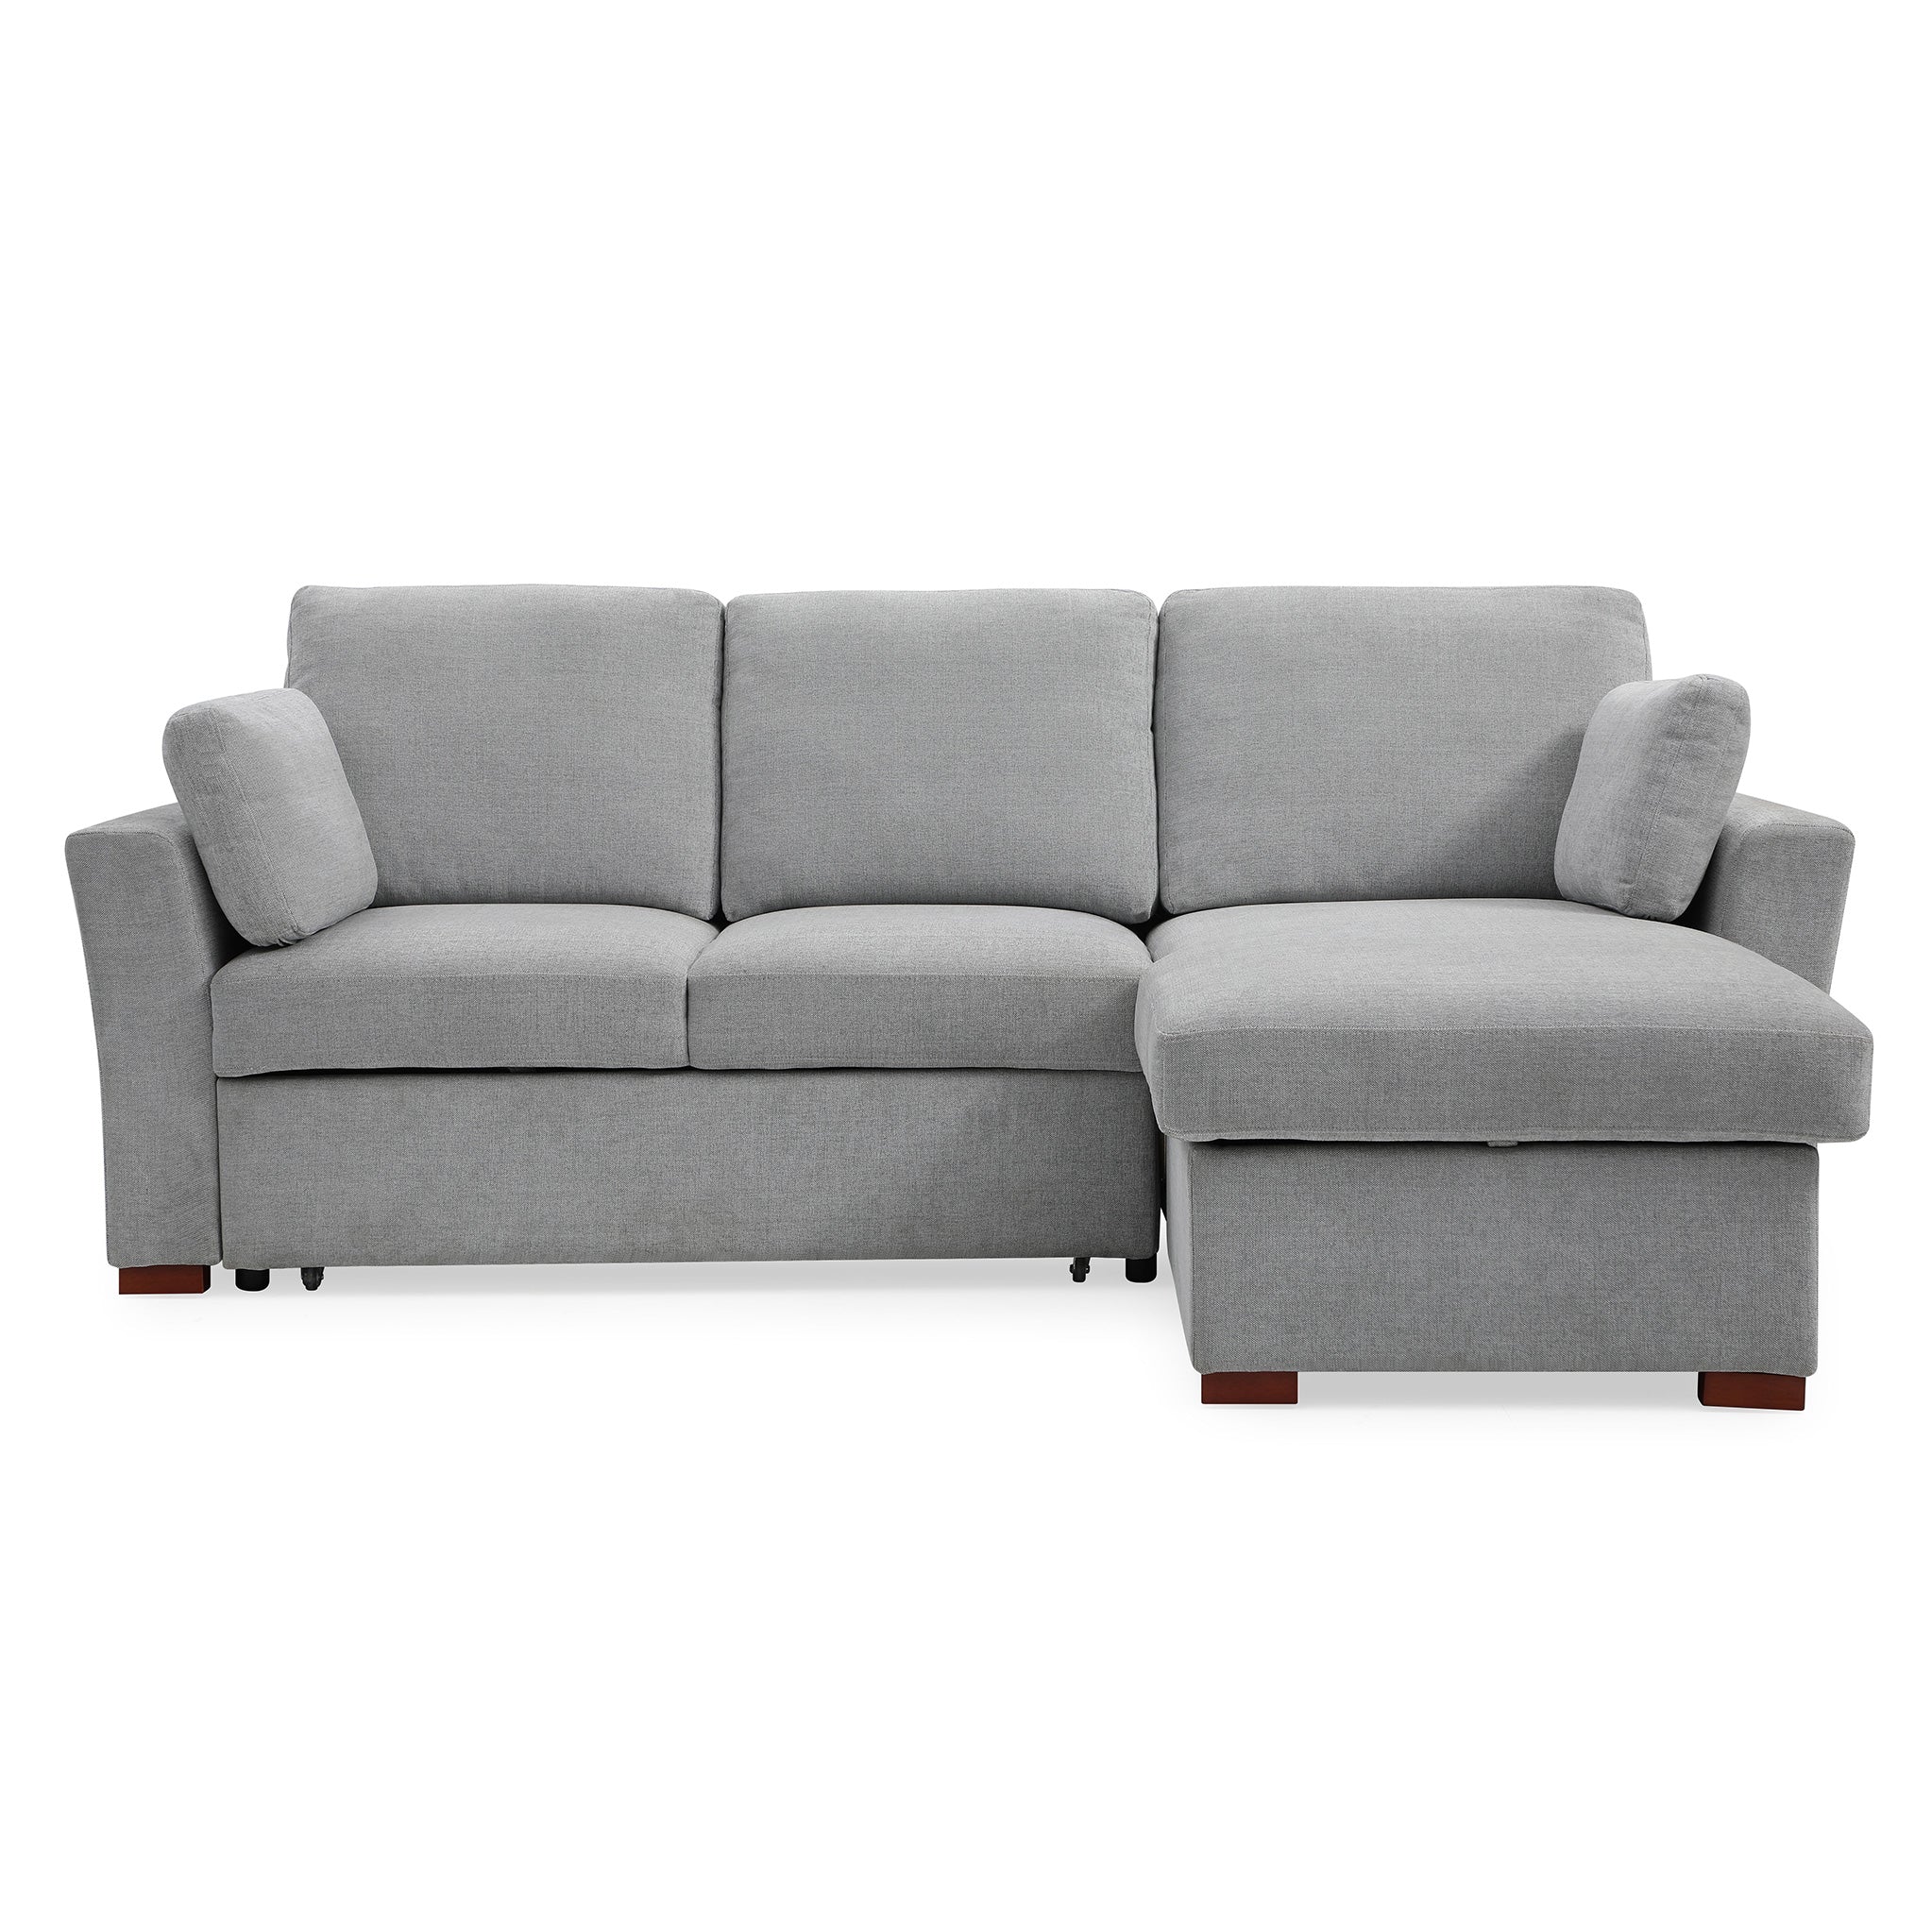 Levan Grey 3 Seater Chaise Pop Out Sofa Bed For Living Room Roseland